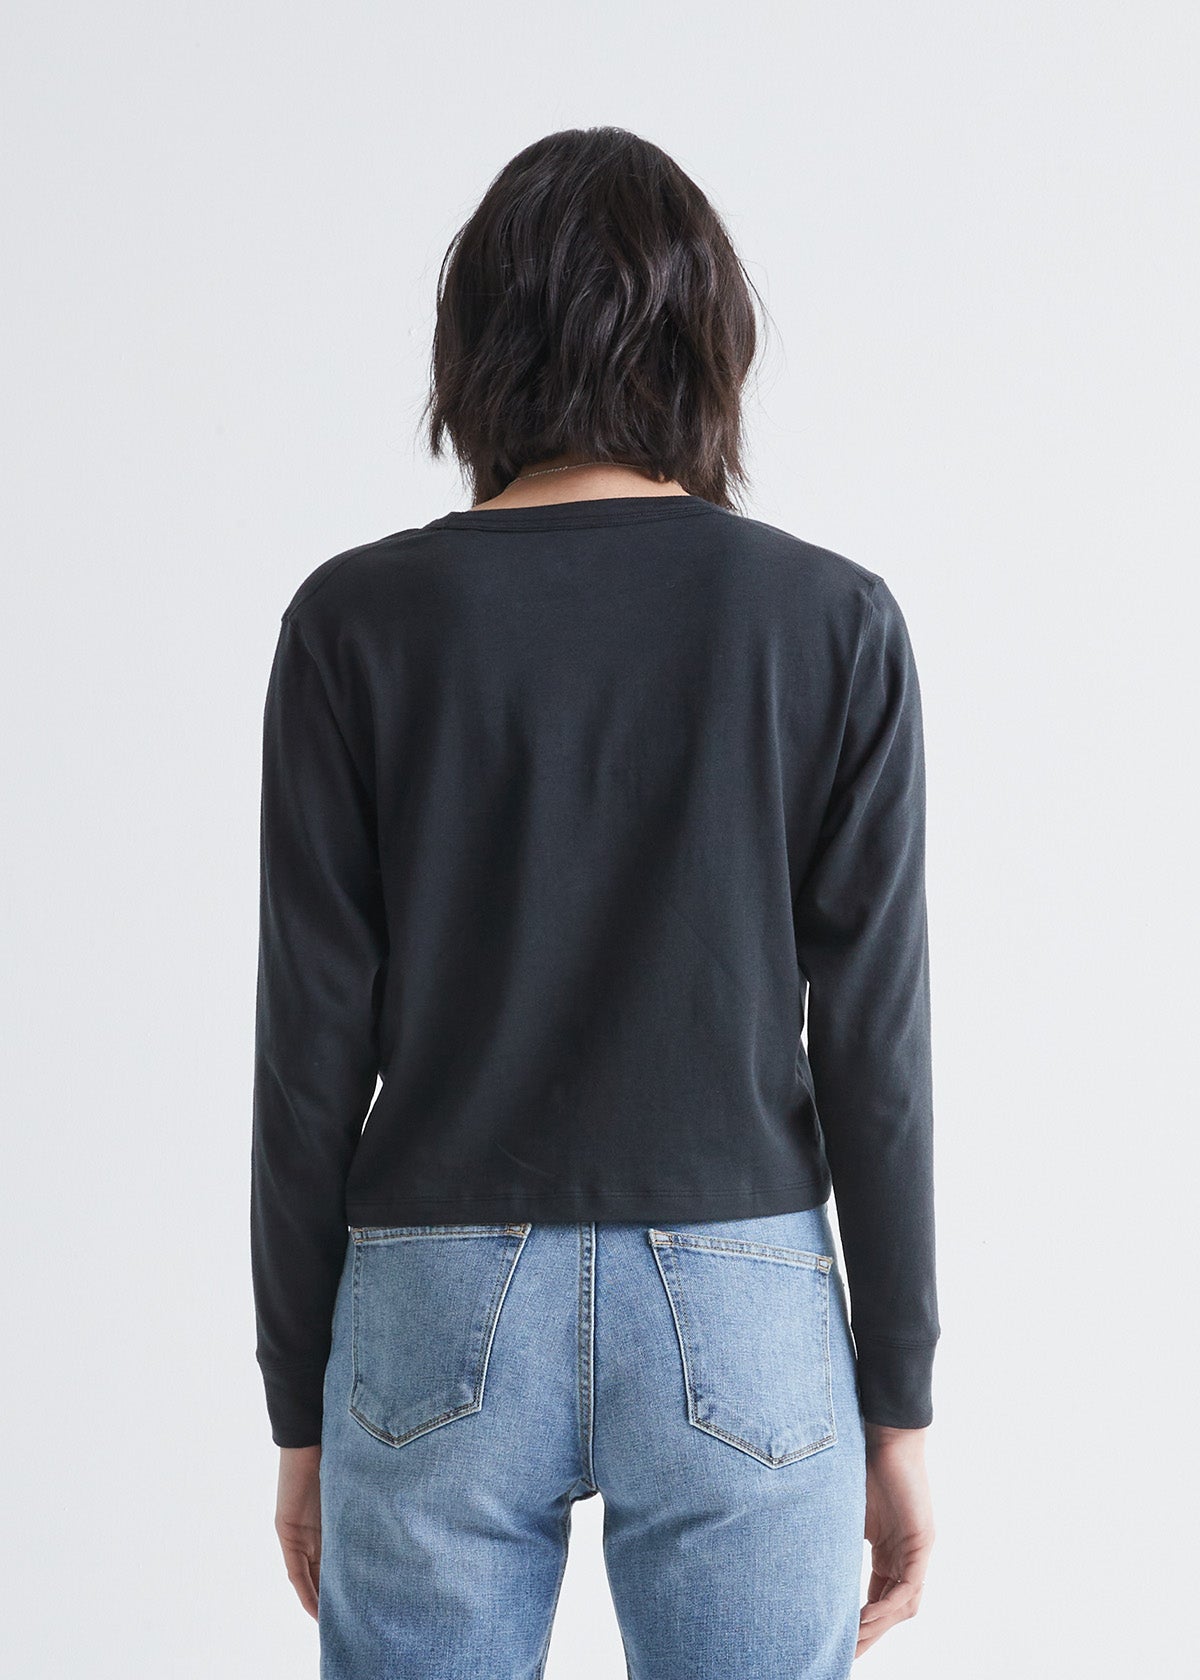 Women's Whipped Cropped Long Sleeve